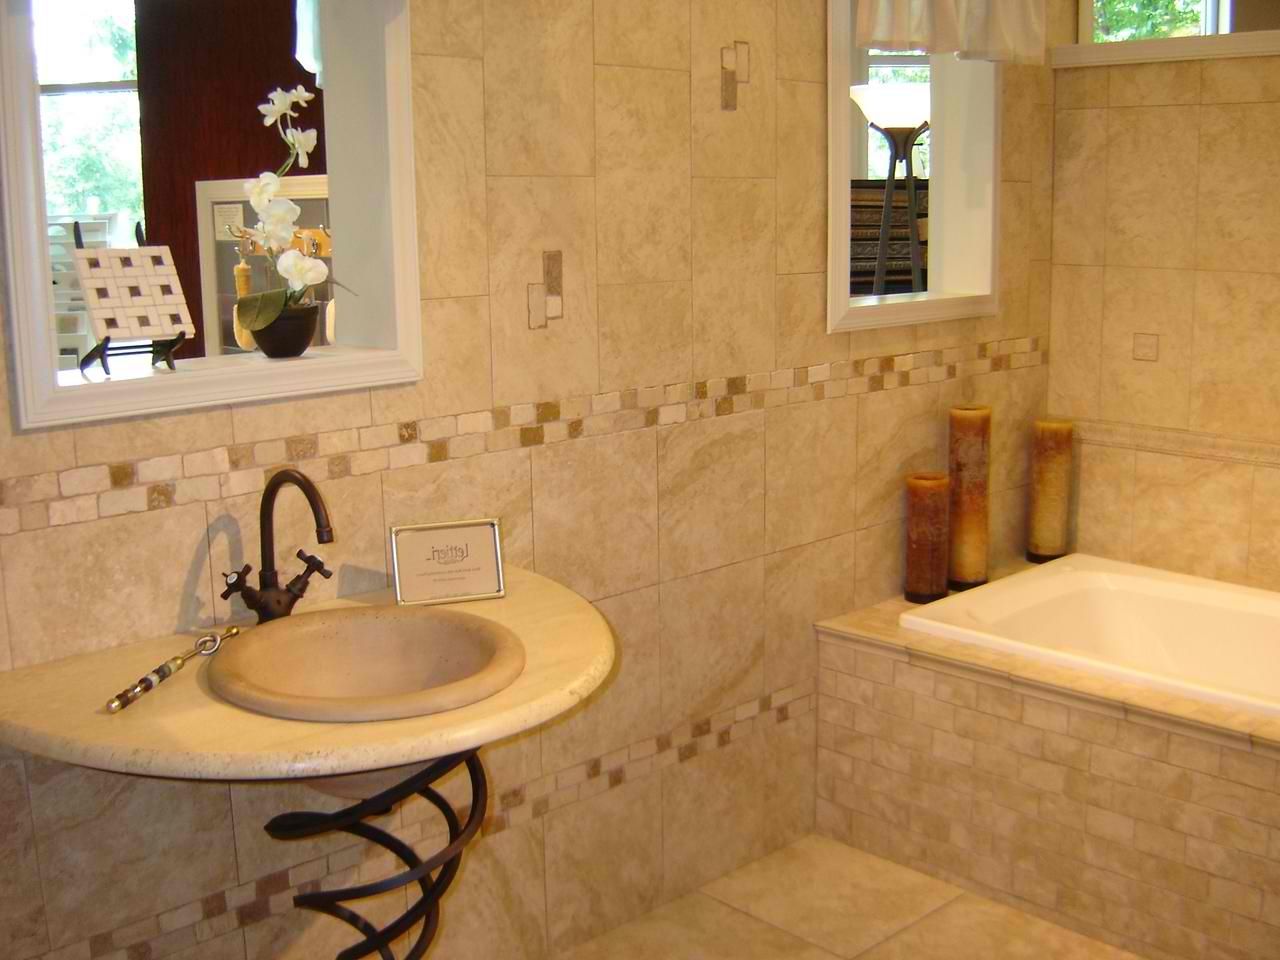 Unique Freestanding Washstand Next To Tub Paired With Decorative Brown Bathroom Tile Background Design (Photo 3087 of 7825)